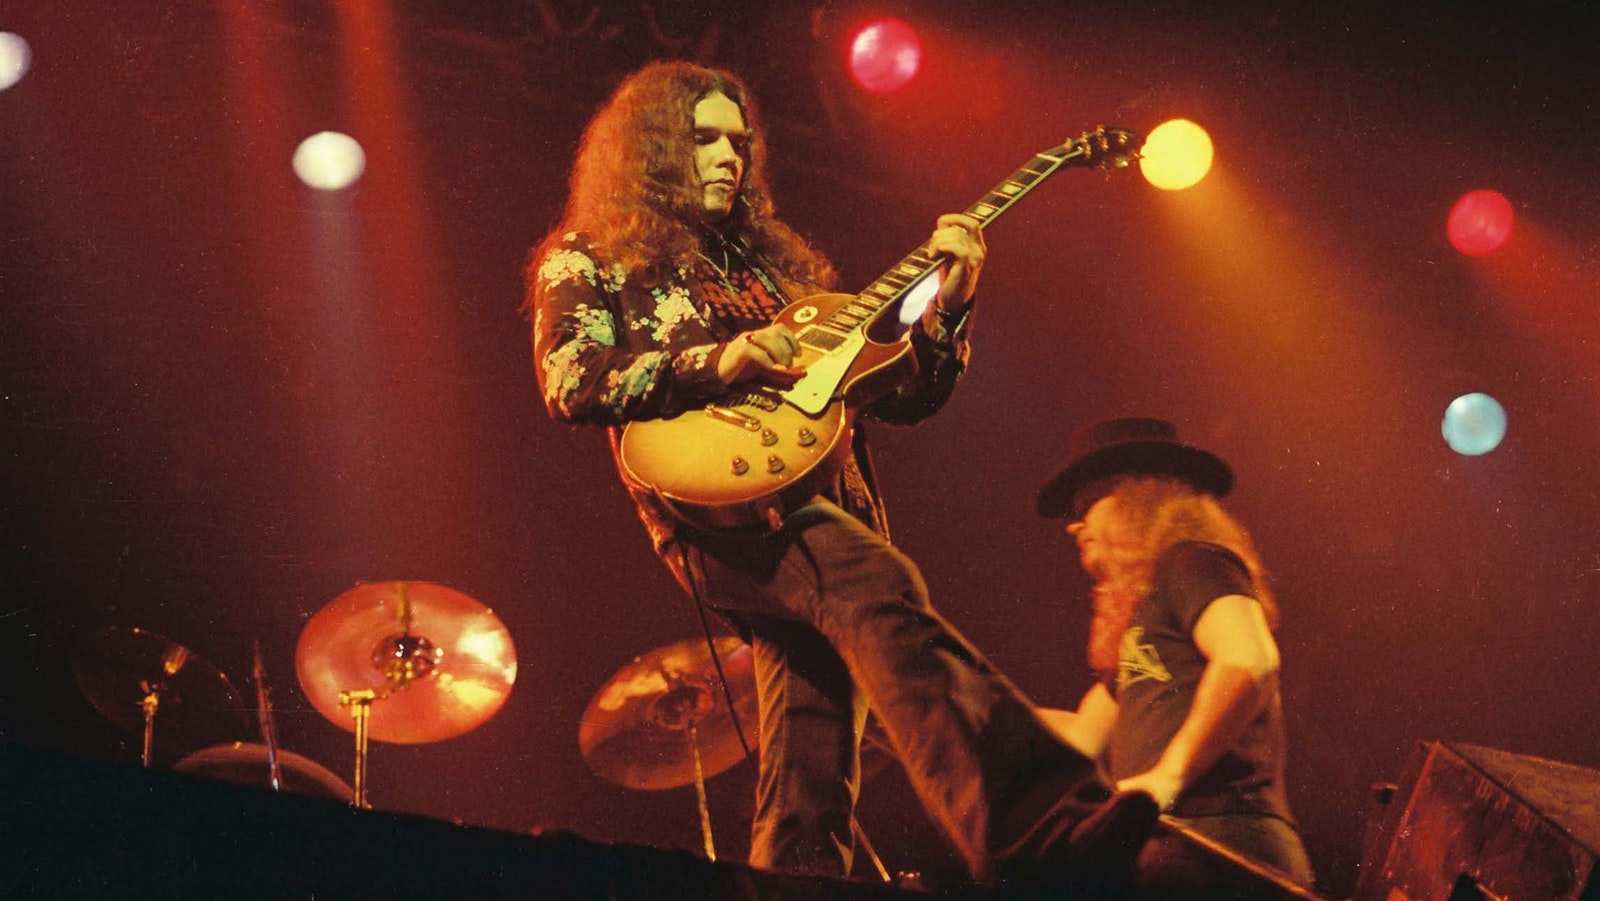 Gary Rossington performs with Lynyrd Skynyrd at the Apollo Theatre in Glasgow Scotland on Feb. 9, 1977.